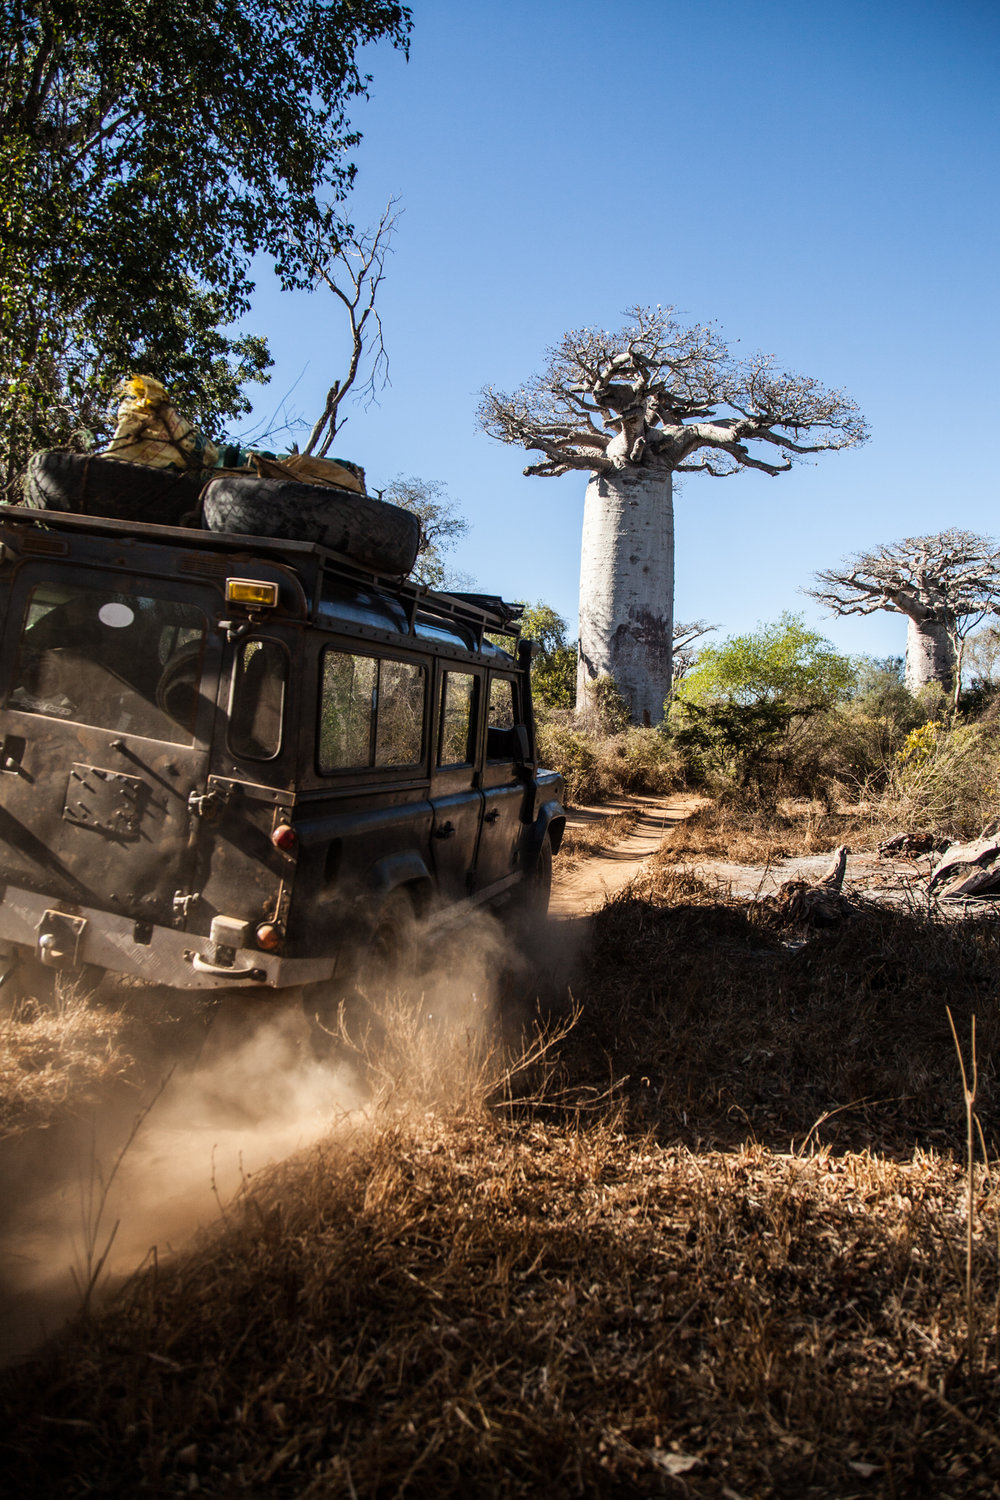  The Western Forests are Studded with Baobabs 